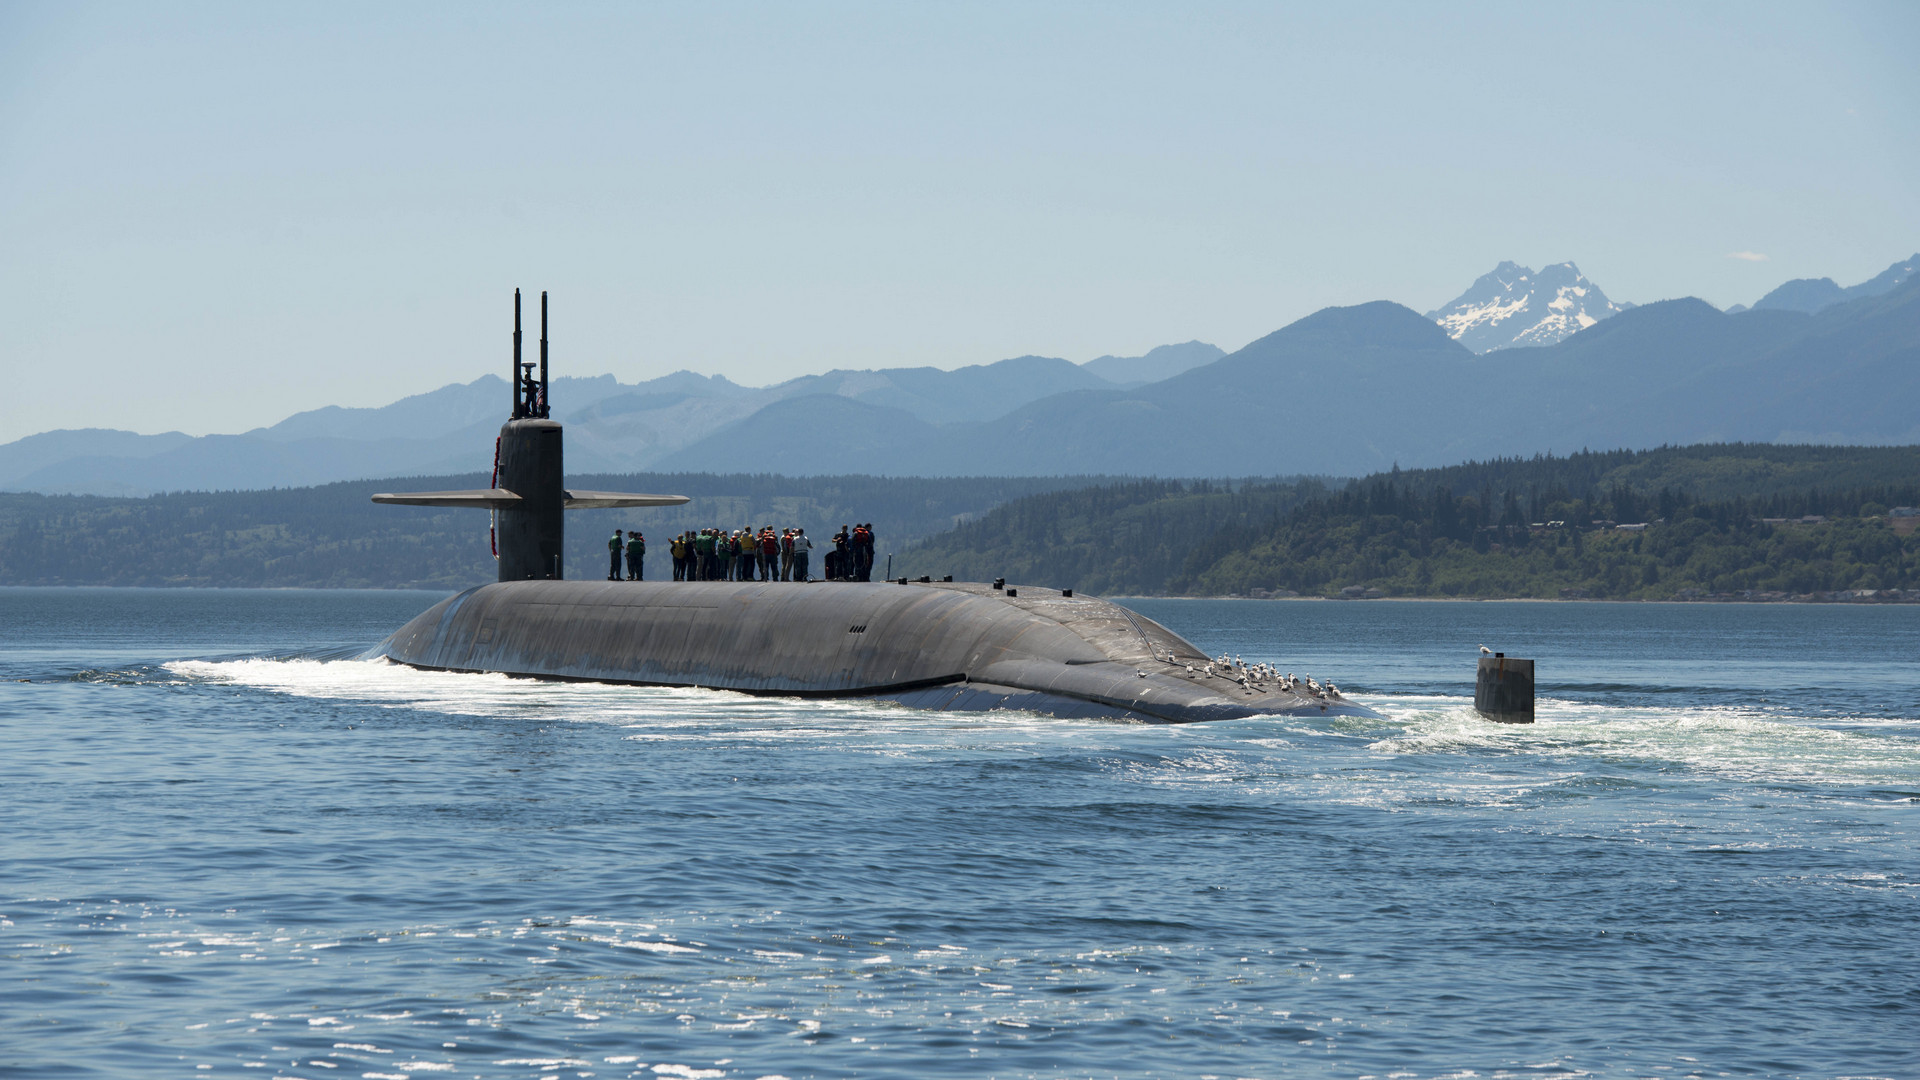 Puget Sound, Wash. (July 12, 2018) The Ohio-class ballistic missile submarine USS Nebraska (SSBN 739) transits the Hood Canal as it returns home to Naval Base Kitsap-Bangor following the boat's first strategic patrol since 2013. Nebraska recently completed a 41-month engineered refueling overhaul, which will extend the life of the submarine for another 20 years. (U.S. Navy photo by Mass Communication Specialist 1st Class Amanda R. Gray. -